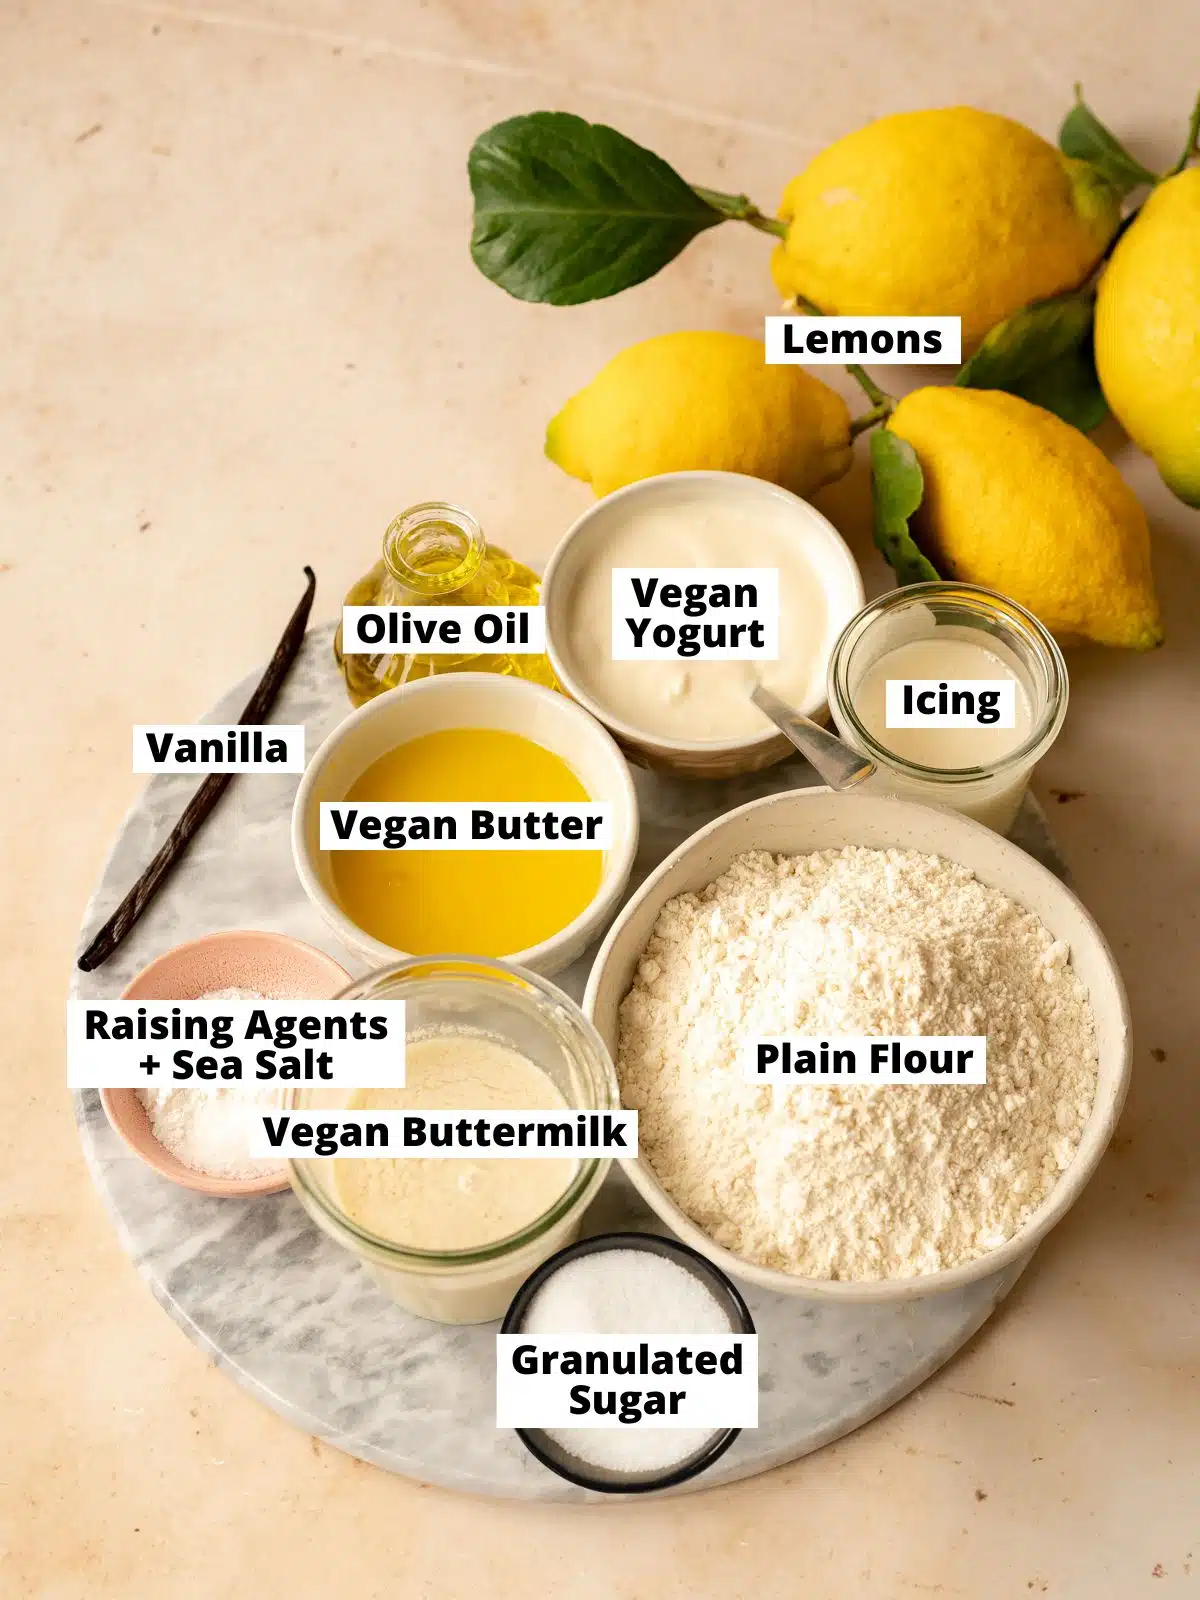 ingredients needed to make vegan lemon loaf measured out into bowls on a pink table.